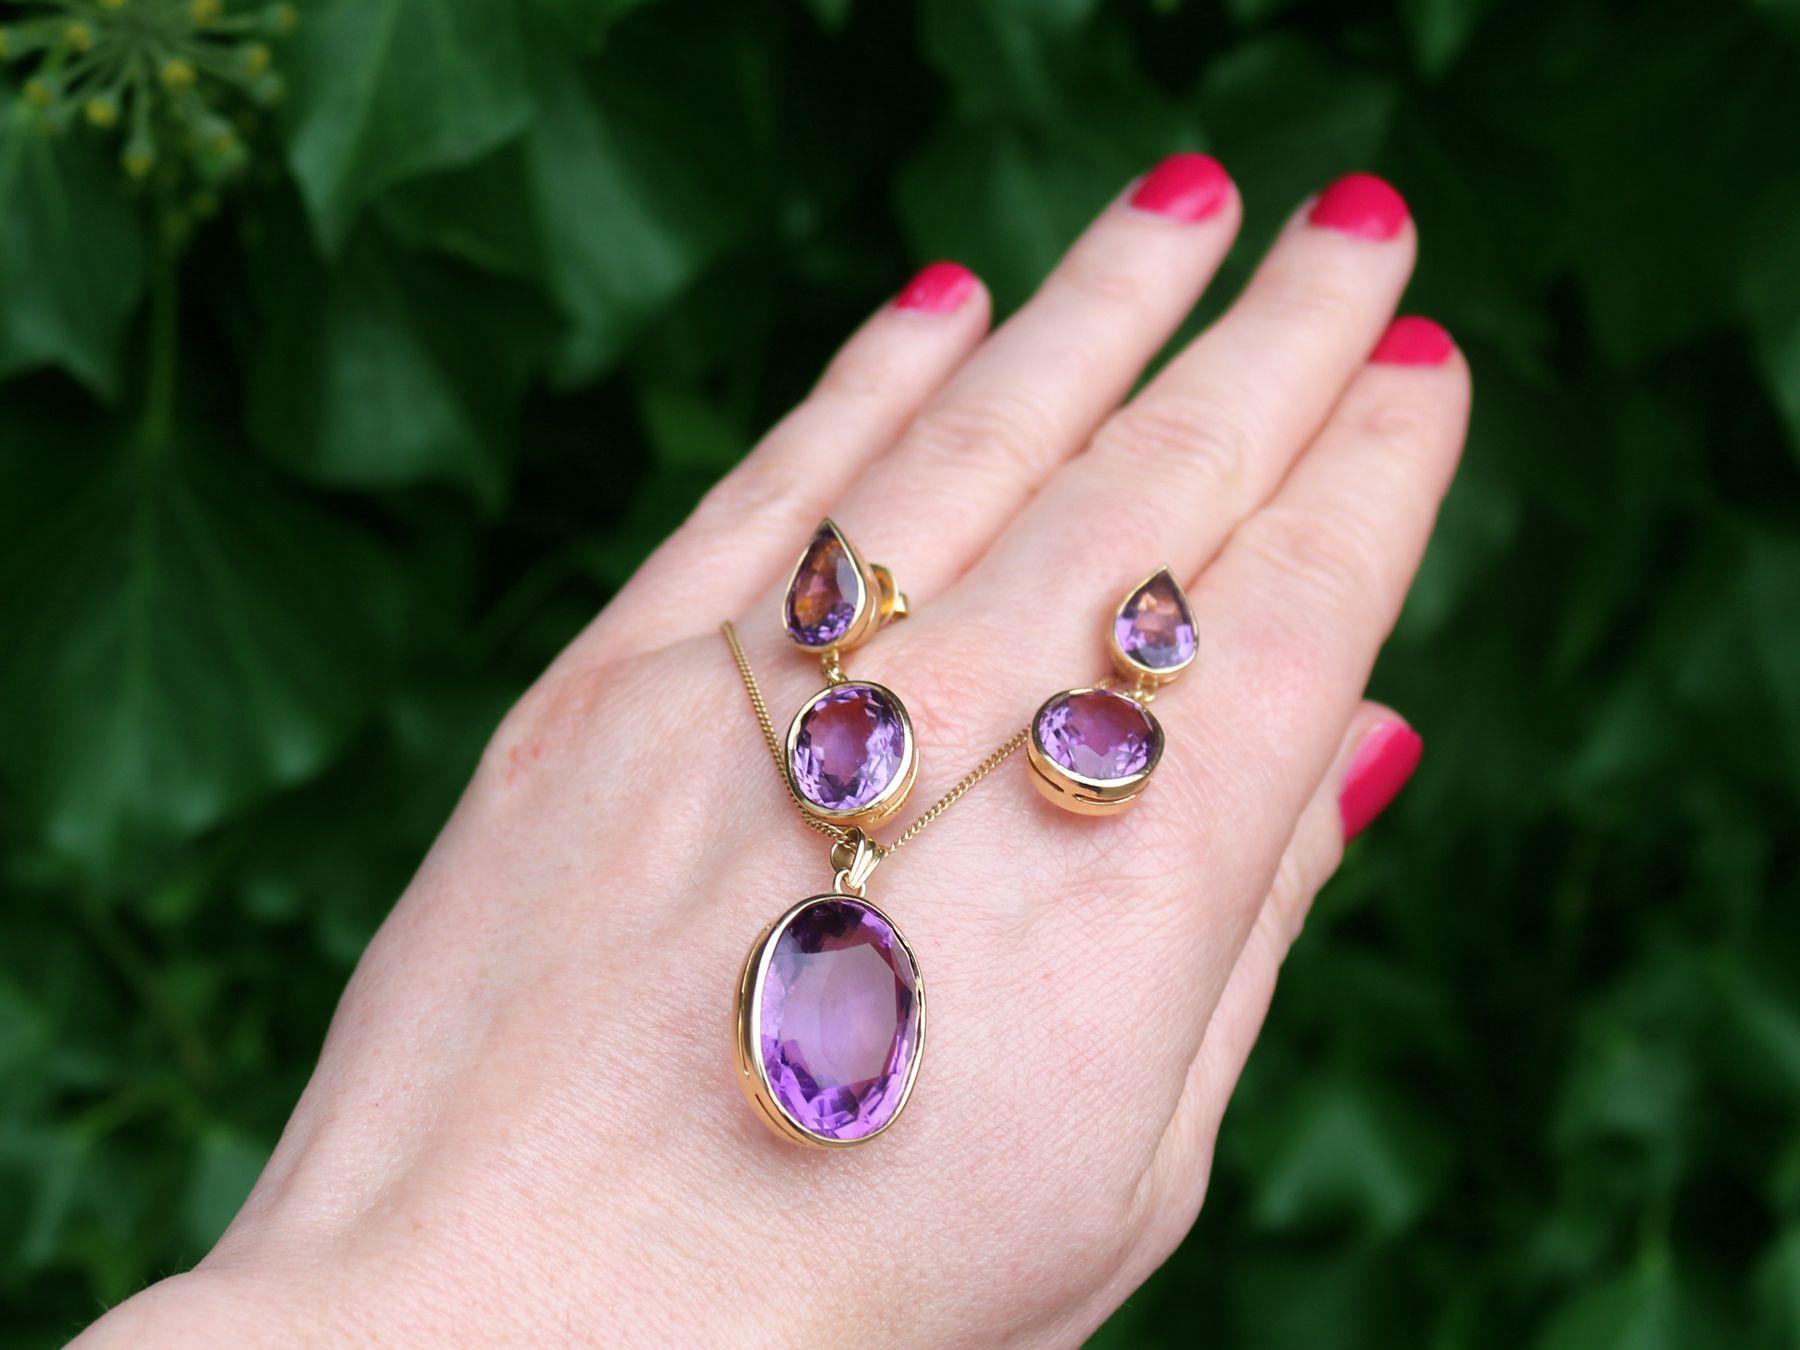 A fine and impressive vintage 42.91 carat amethyst and 18 karat yellow gold earring and necklace set; part of our diverse vintage jewellery and estate jewelry collections

This fine and impressive vintage amethyst jewellery set has been crafted in